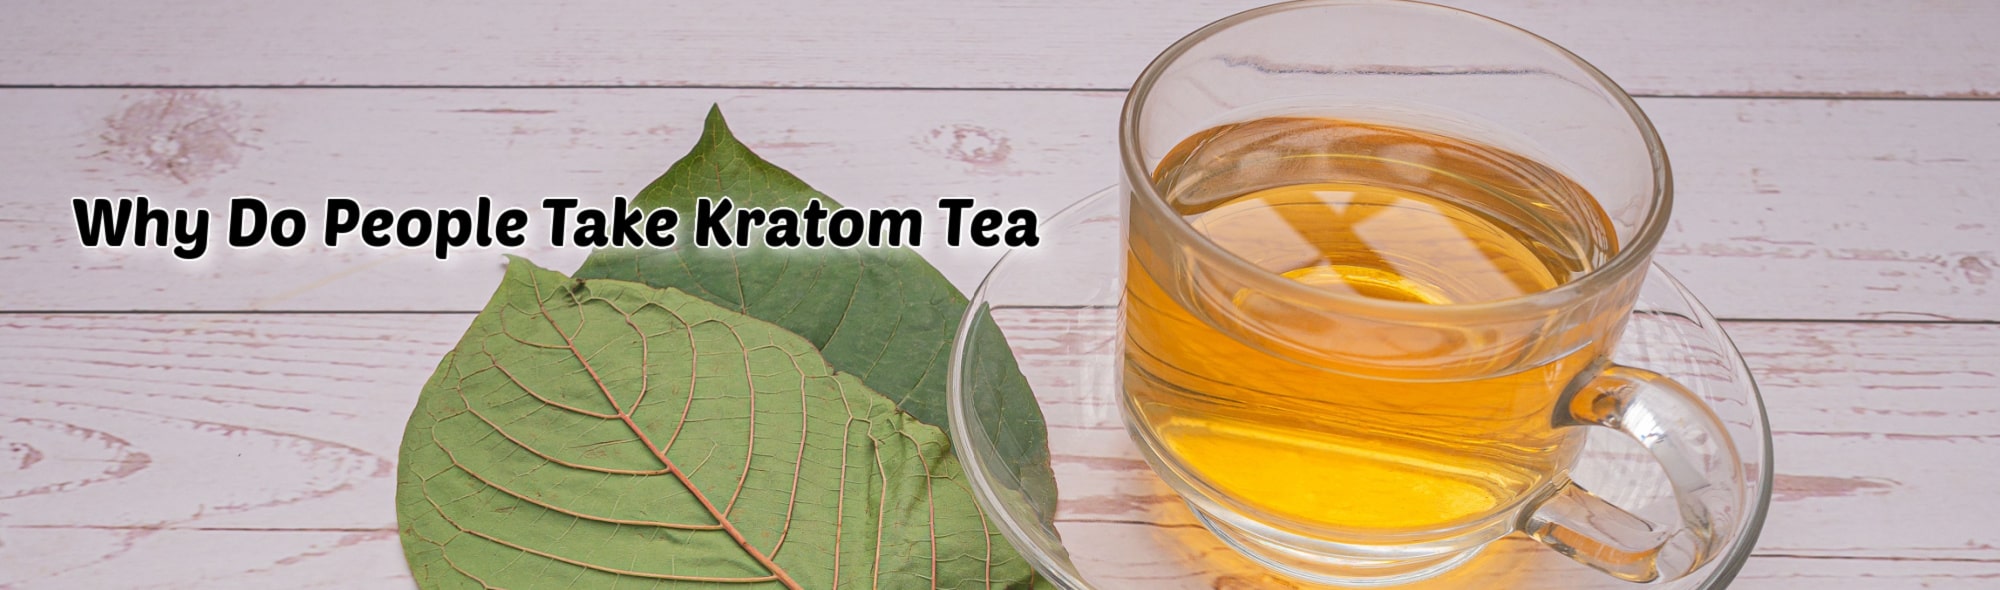 A Complete Guide to Making Kratom Tea: Top 3 Recipes